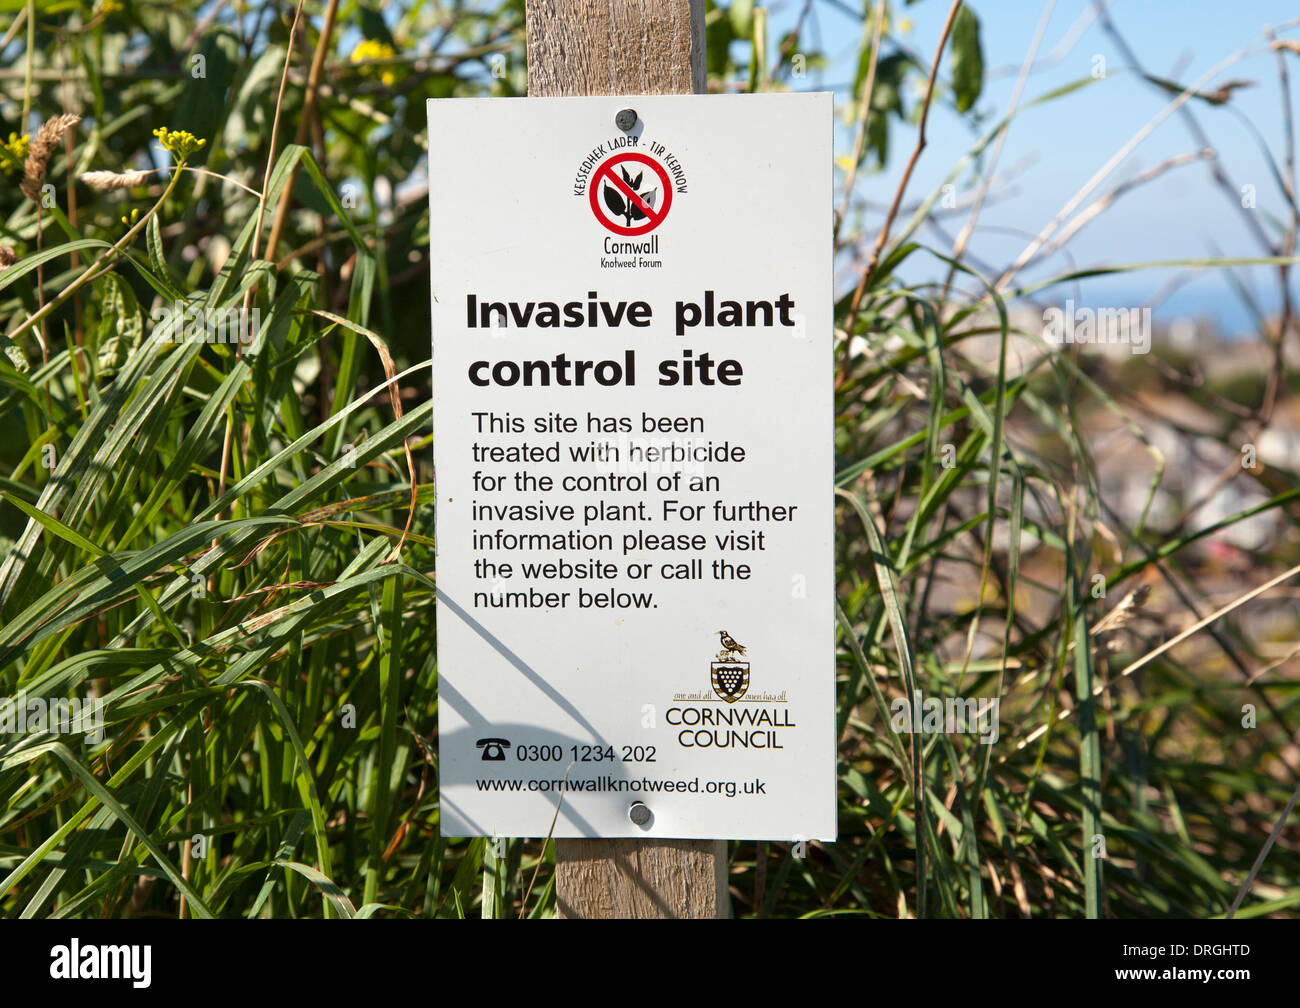 A Knotweed invasive plant control site in Cornwall, U.K. Stock Photo